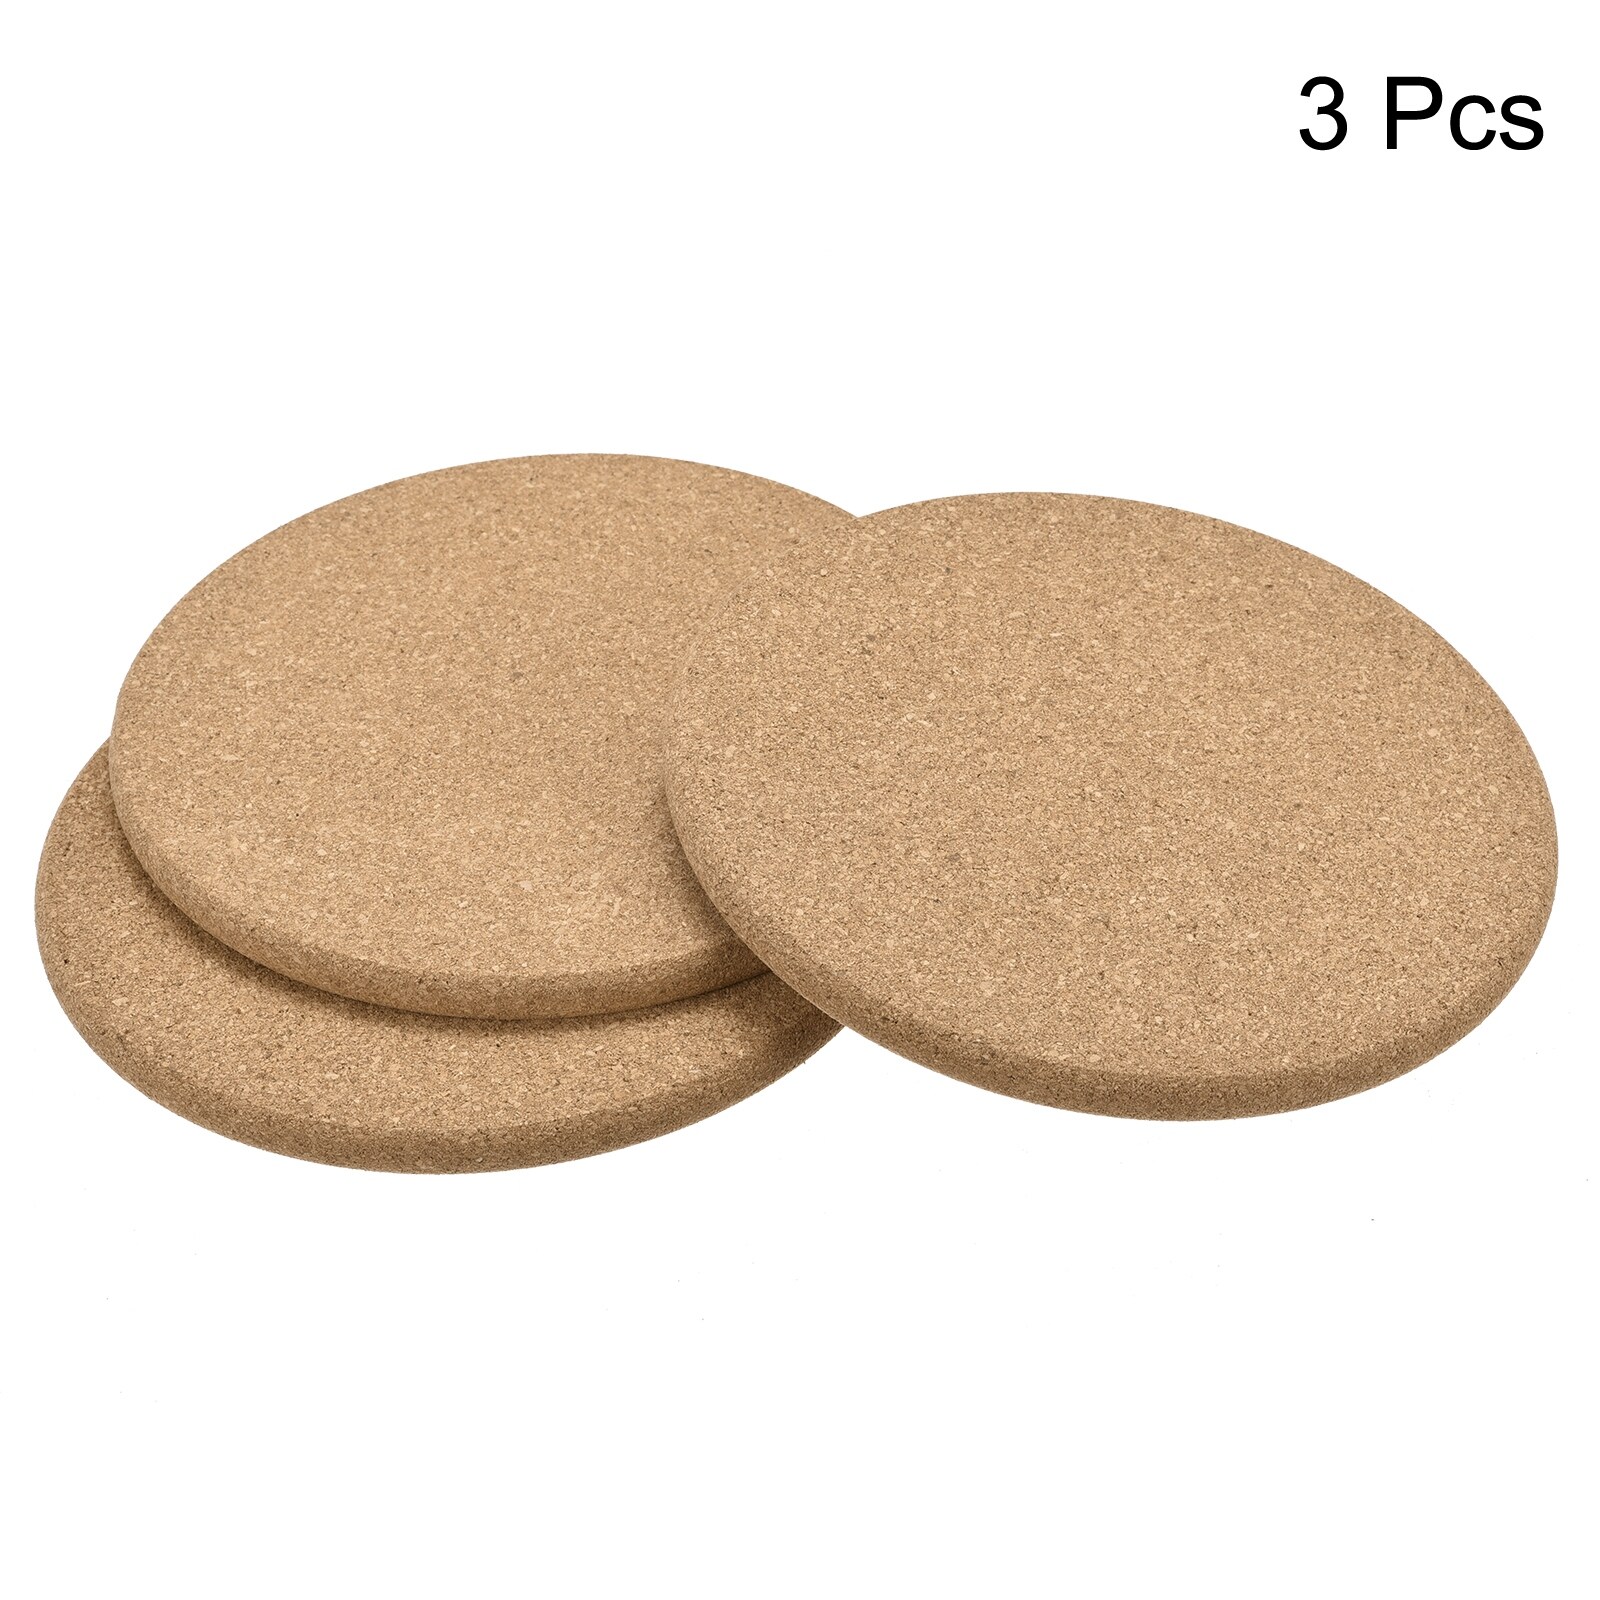 Cork Coasters With Round Round Edge- 12 Pcs Wooden Extra Thick Drink  Coasters